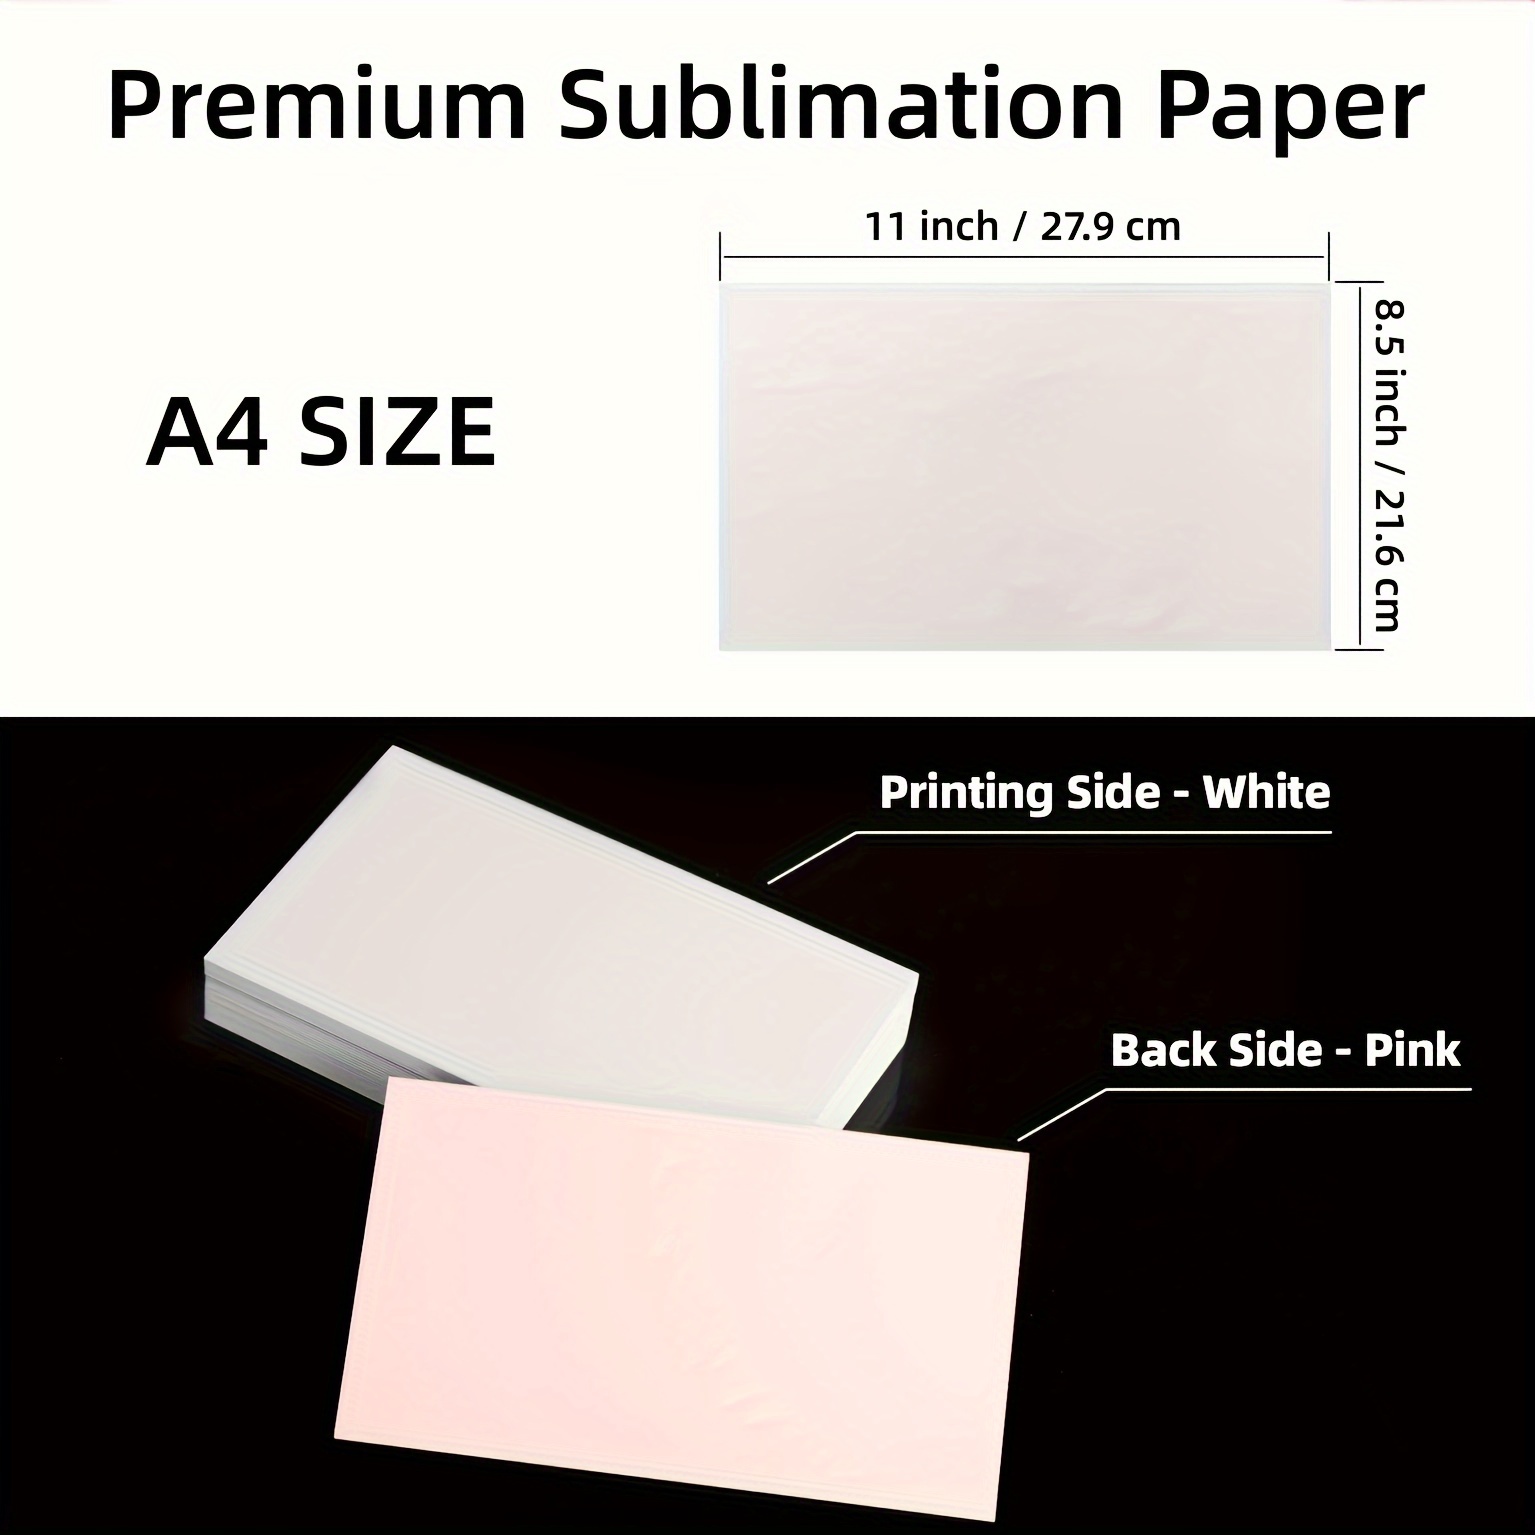 Sublimation Transfer Paper for Cotton, 8.5 x 11, 50 sheets